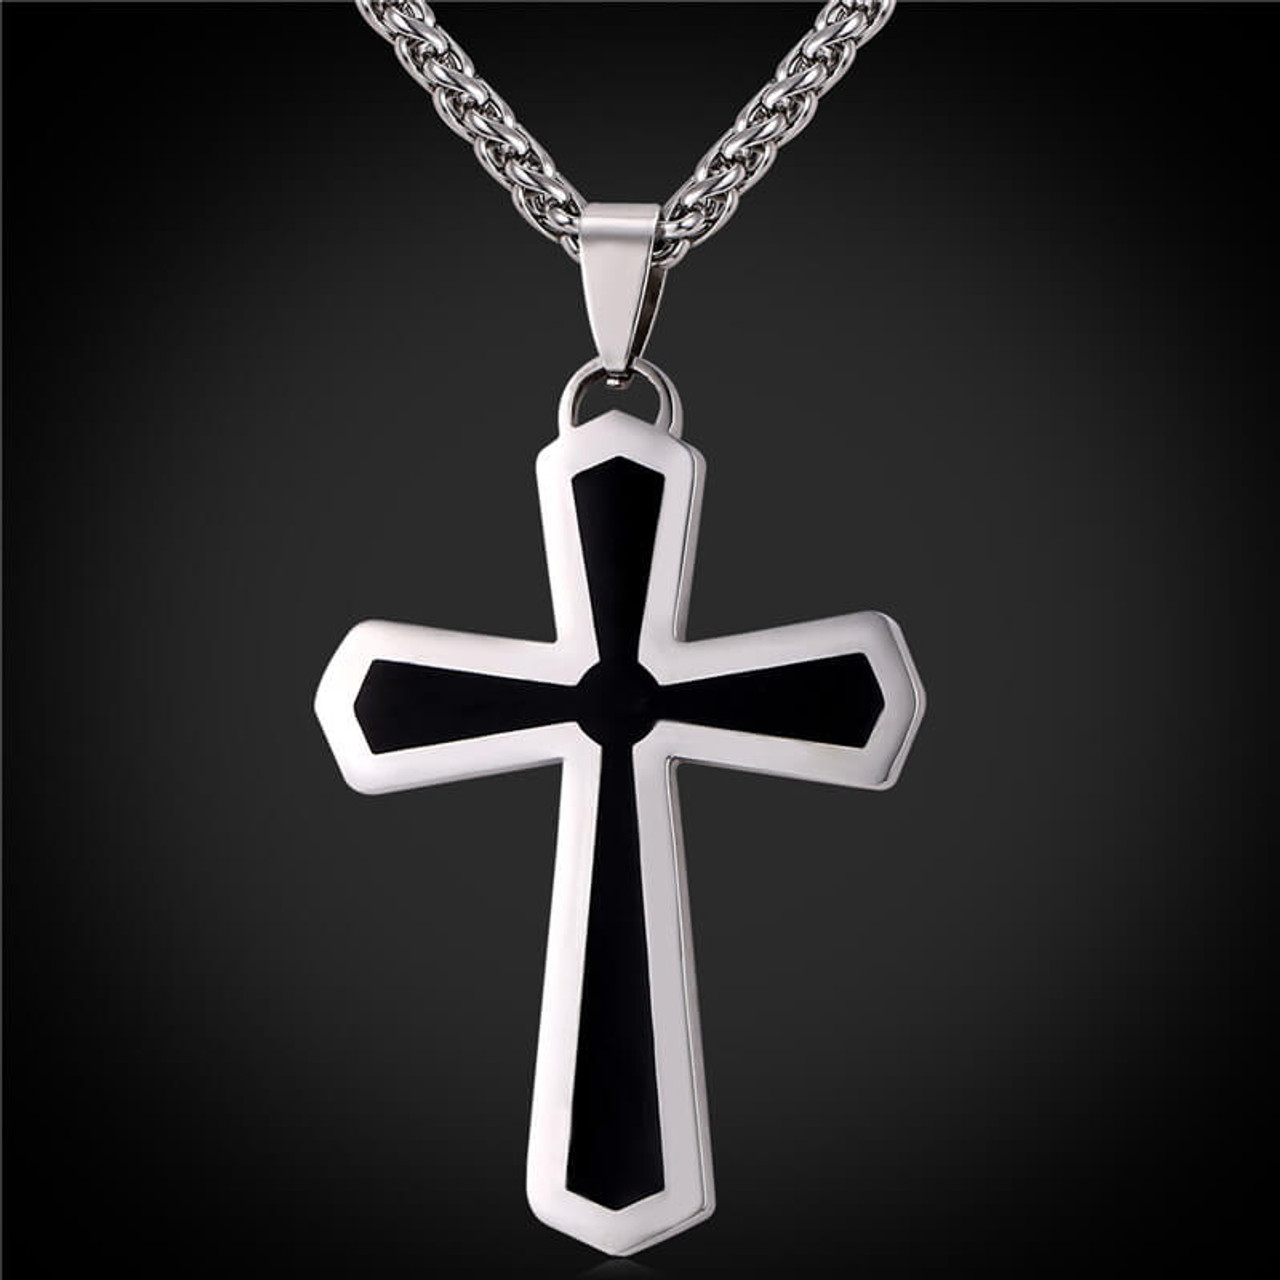 Men's Stainless Steel Cross Pendant - Best Accents Stainless Steel Cross Necklaces For Guys